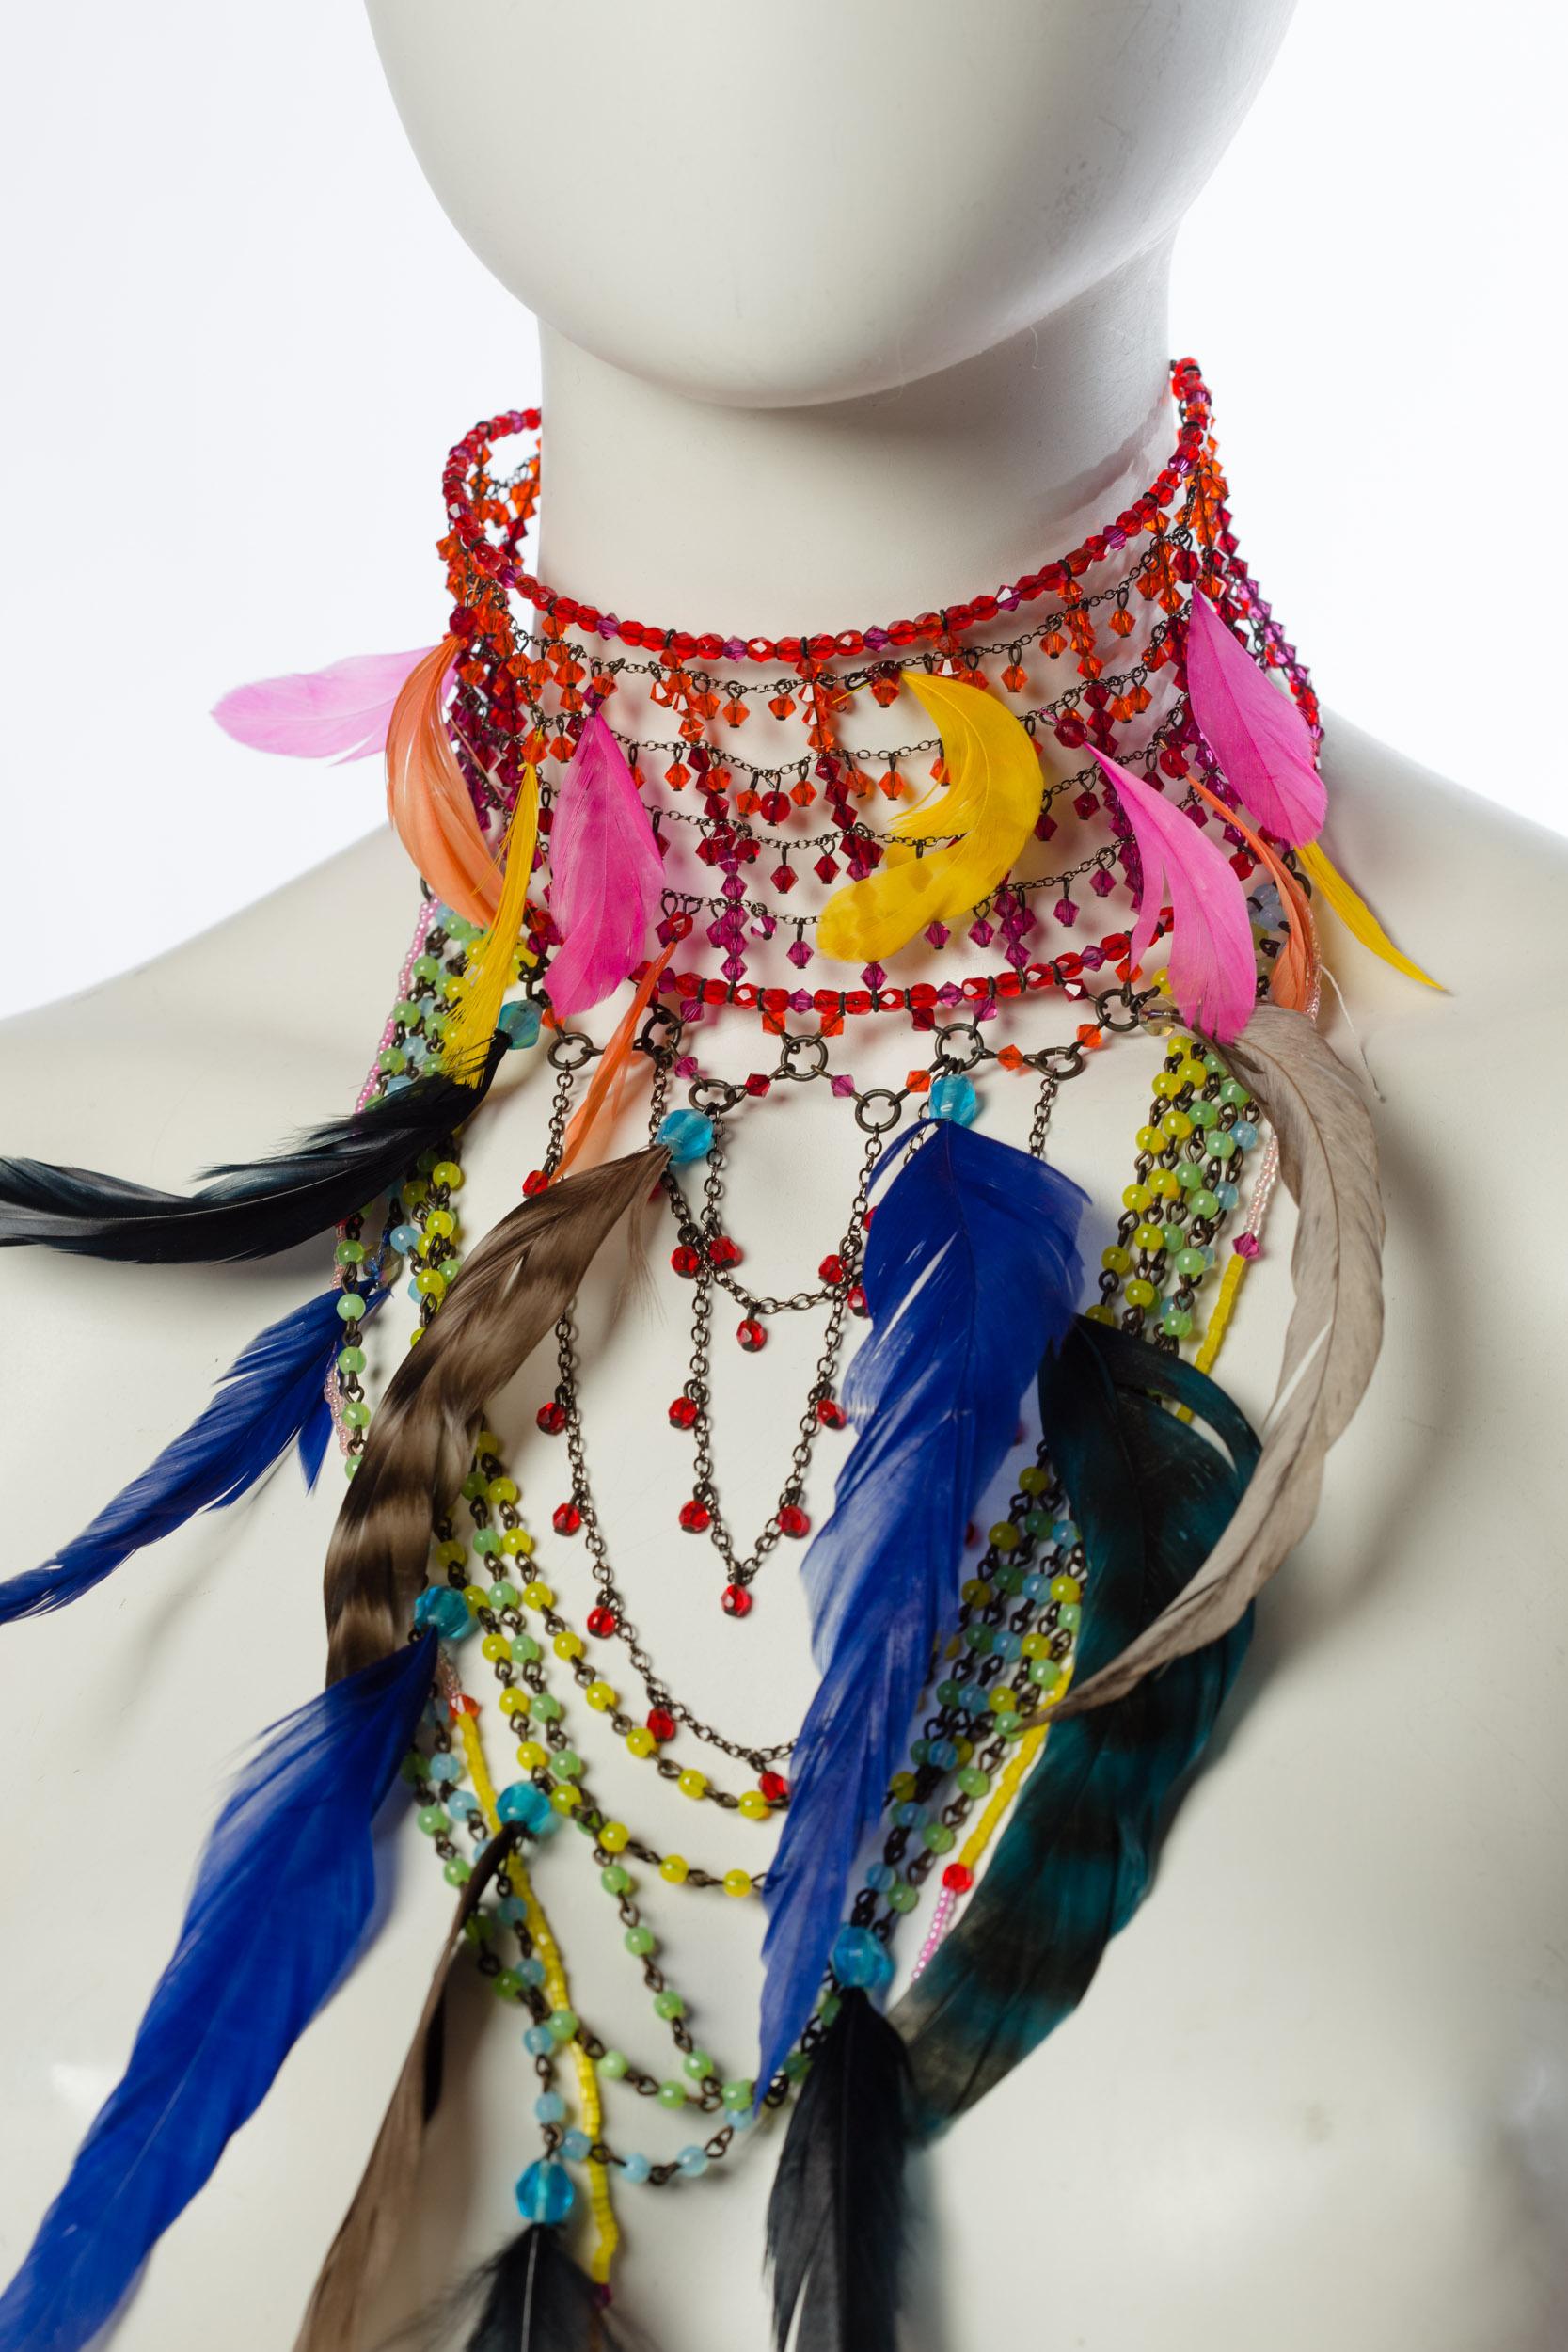 Very in the vibe of late 1990s Galliano Dior with the Masai African choker style. Super sparkly cut glass crystals. 